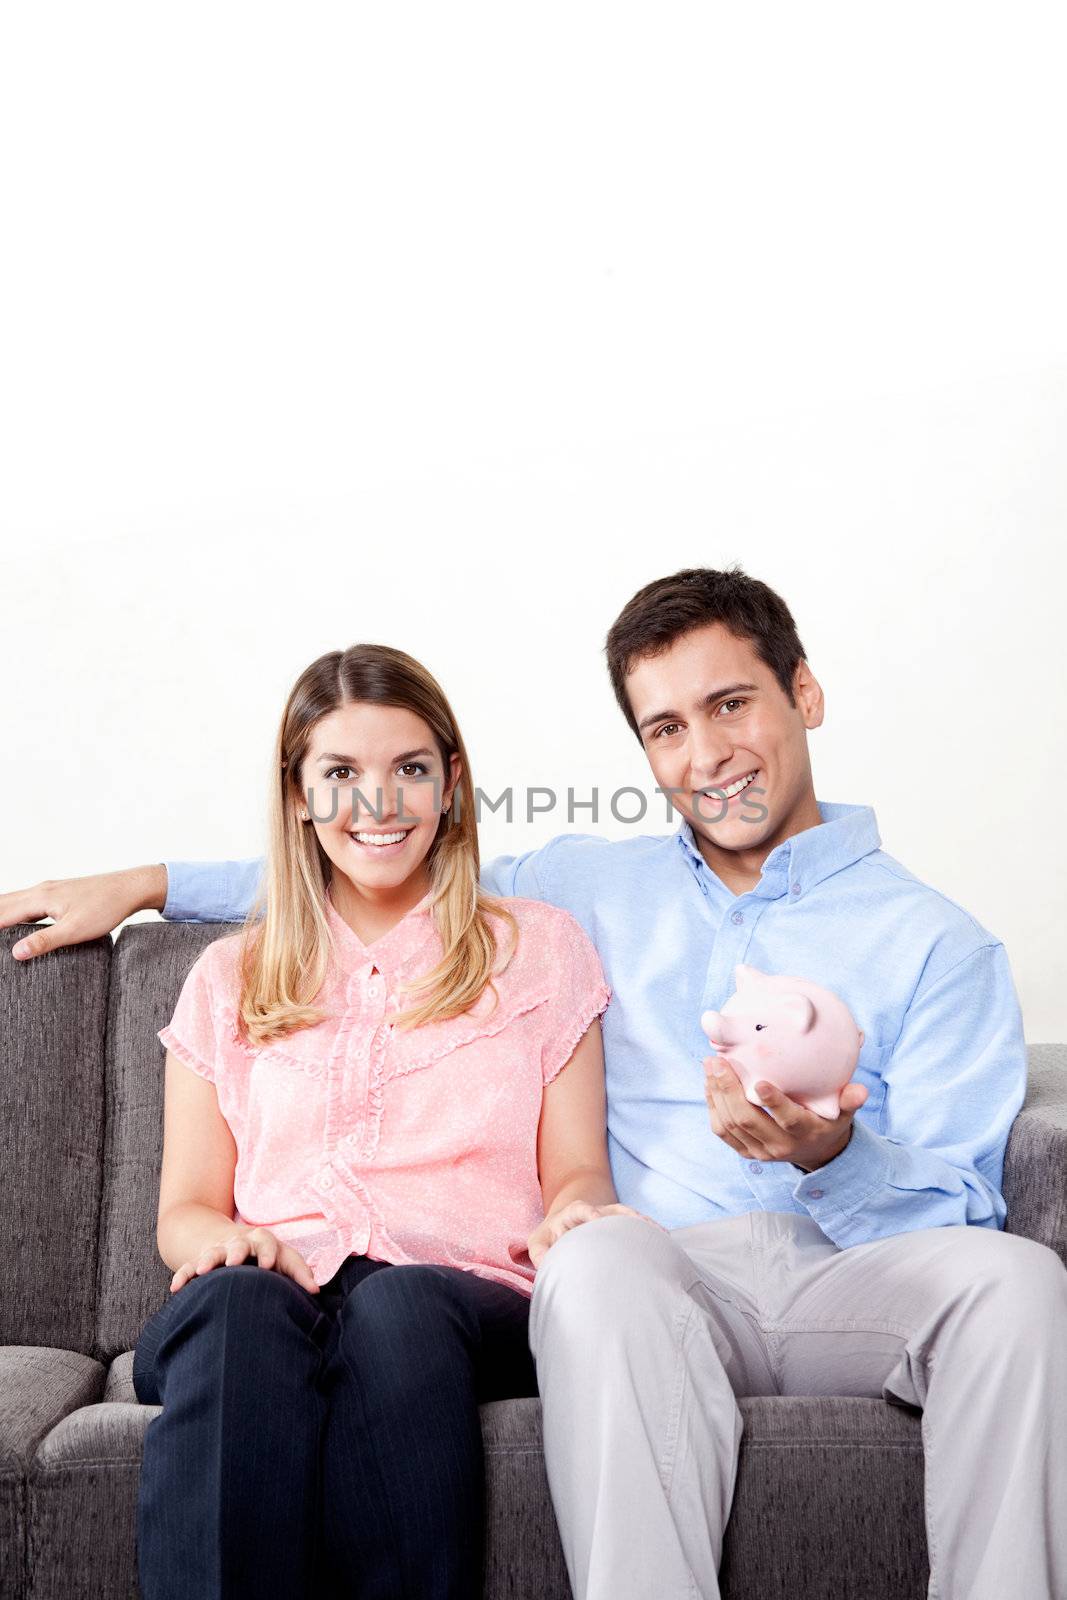 Young couple with a piggy bank sitting on couch